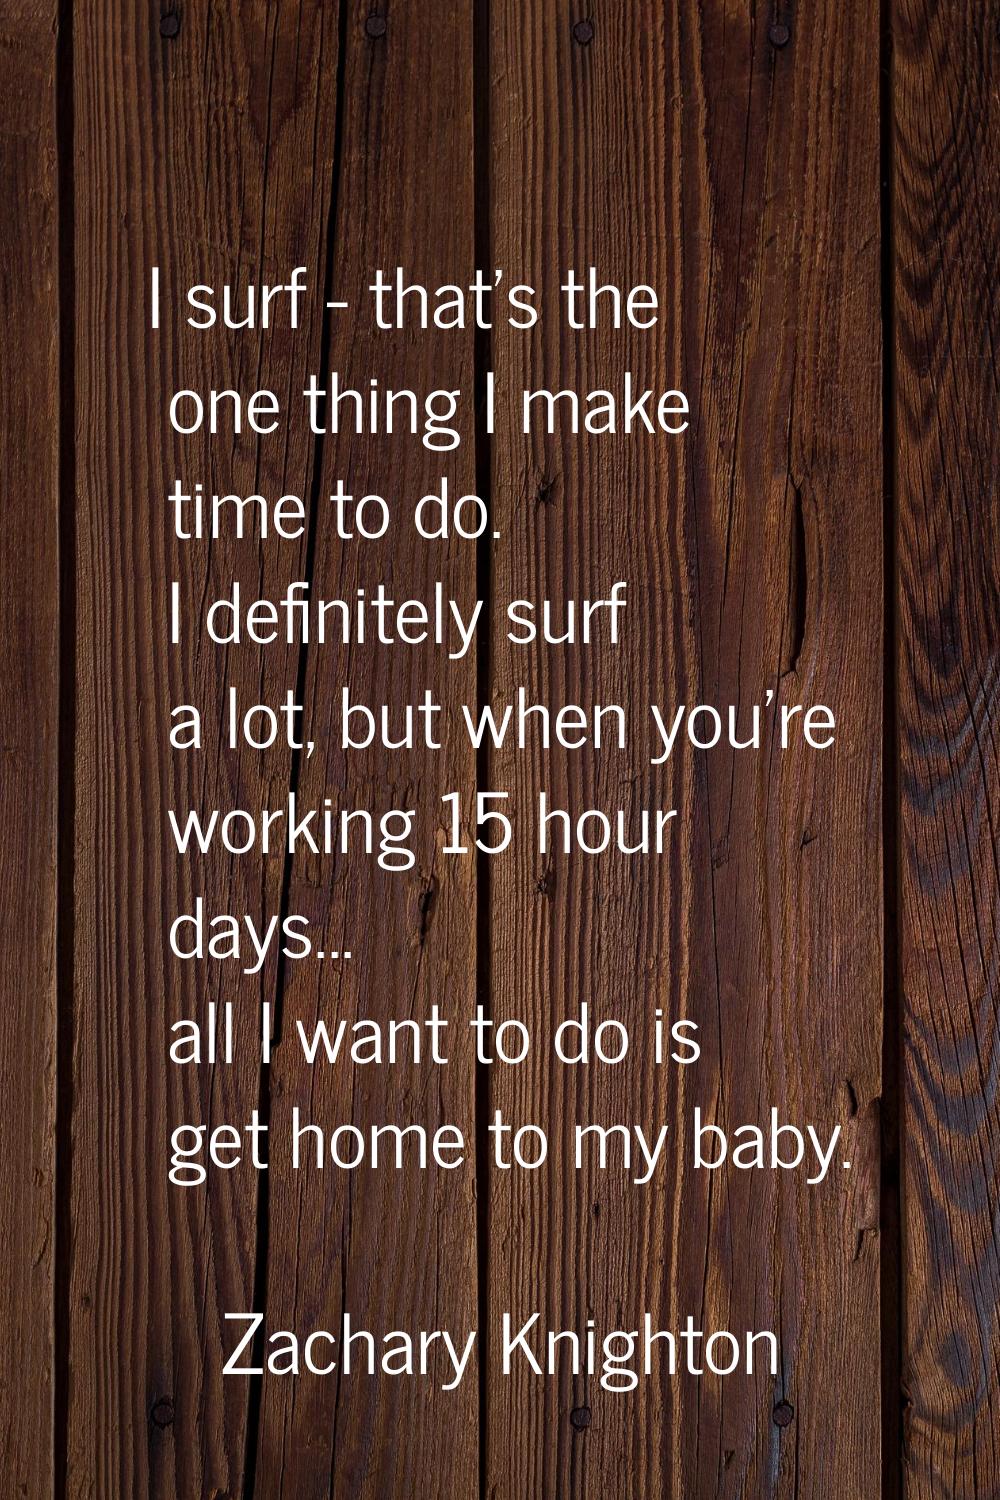 I surf - that's the one thing I make time to do. I definitely surf a lot, but when you're working 1